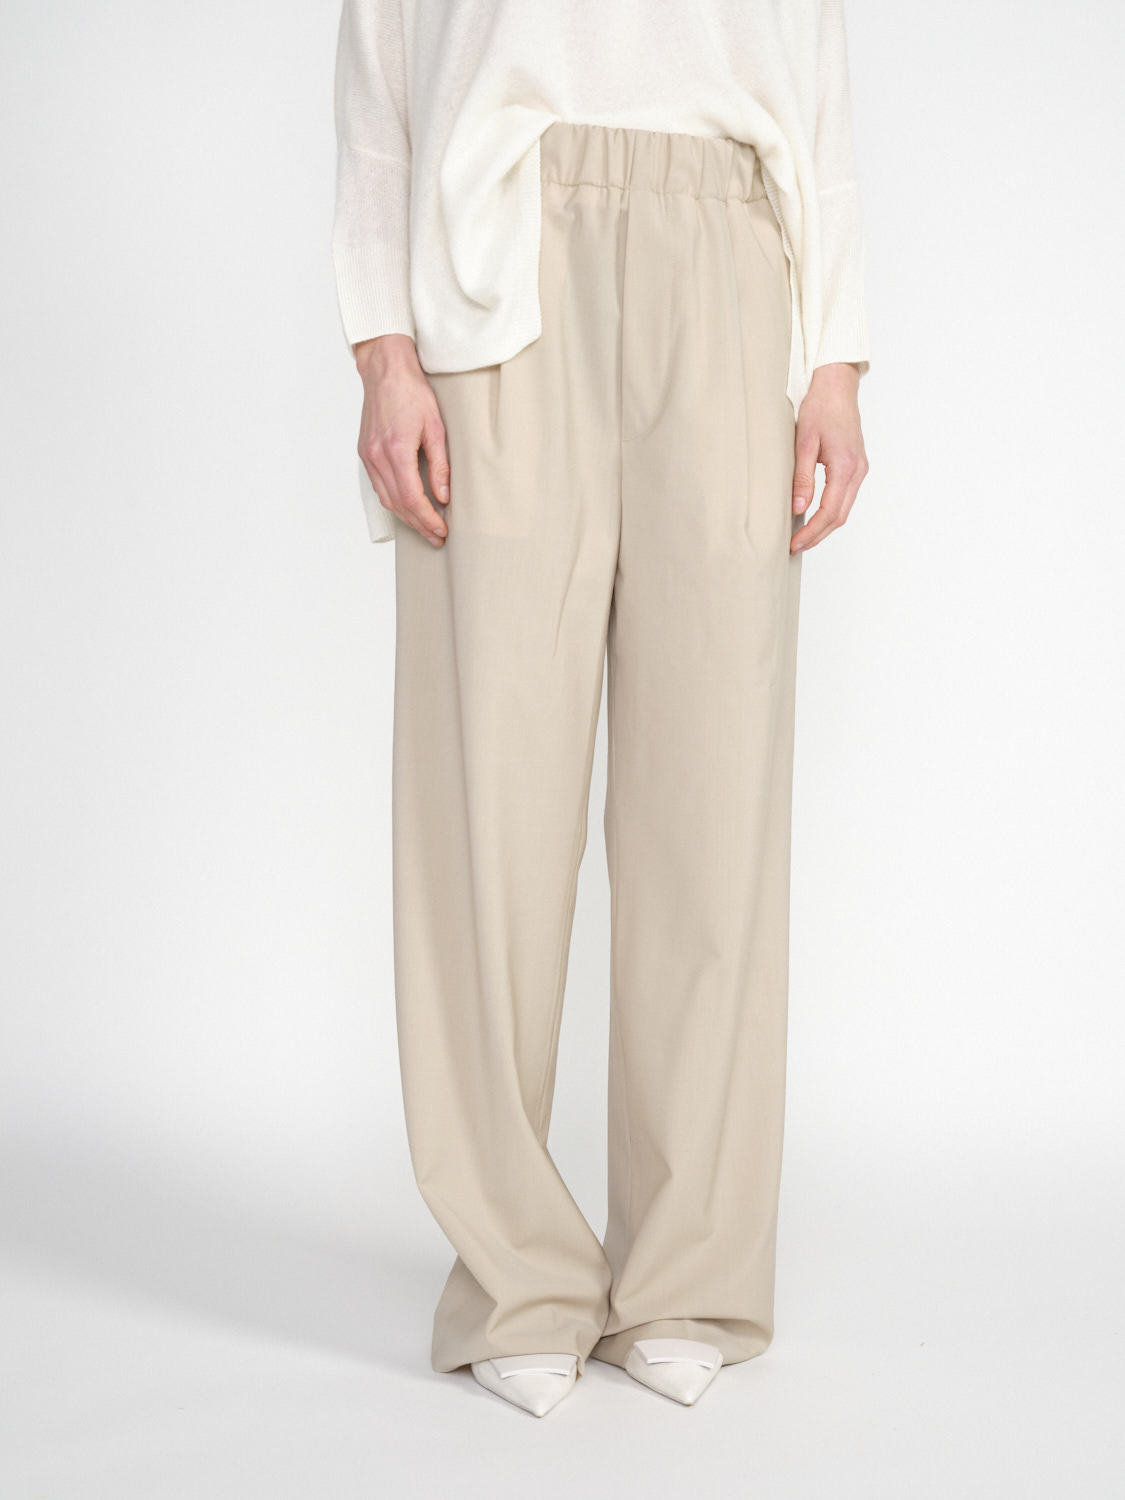 nine in the morning Cara - Pleated trousers  beige 29